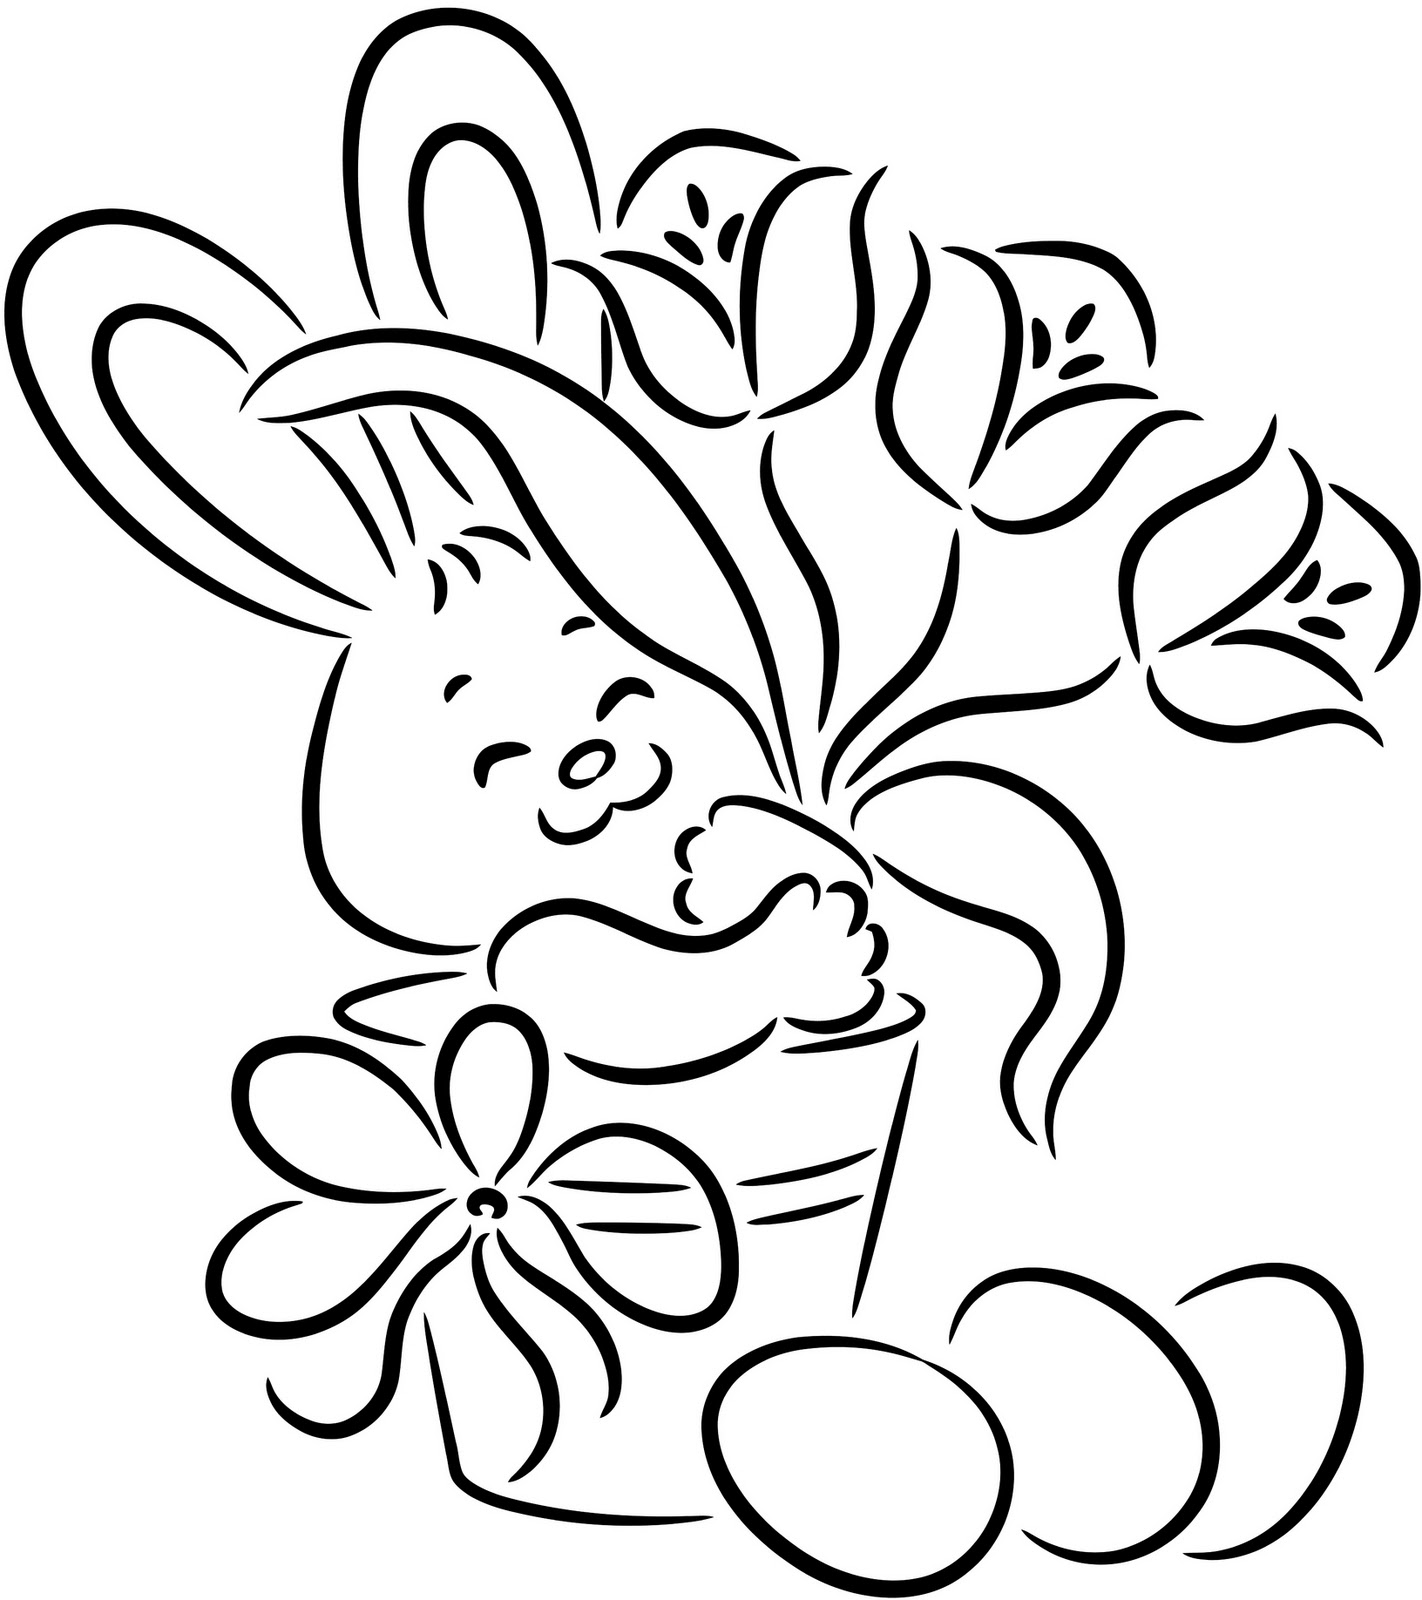 Fun free mermaid games, easter bunny coloring pages, stock videos ...